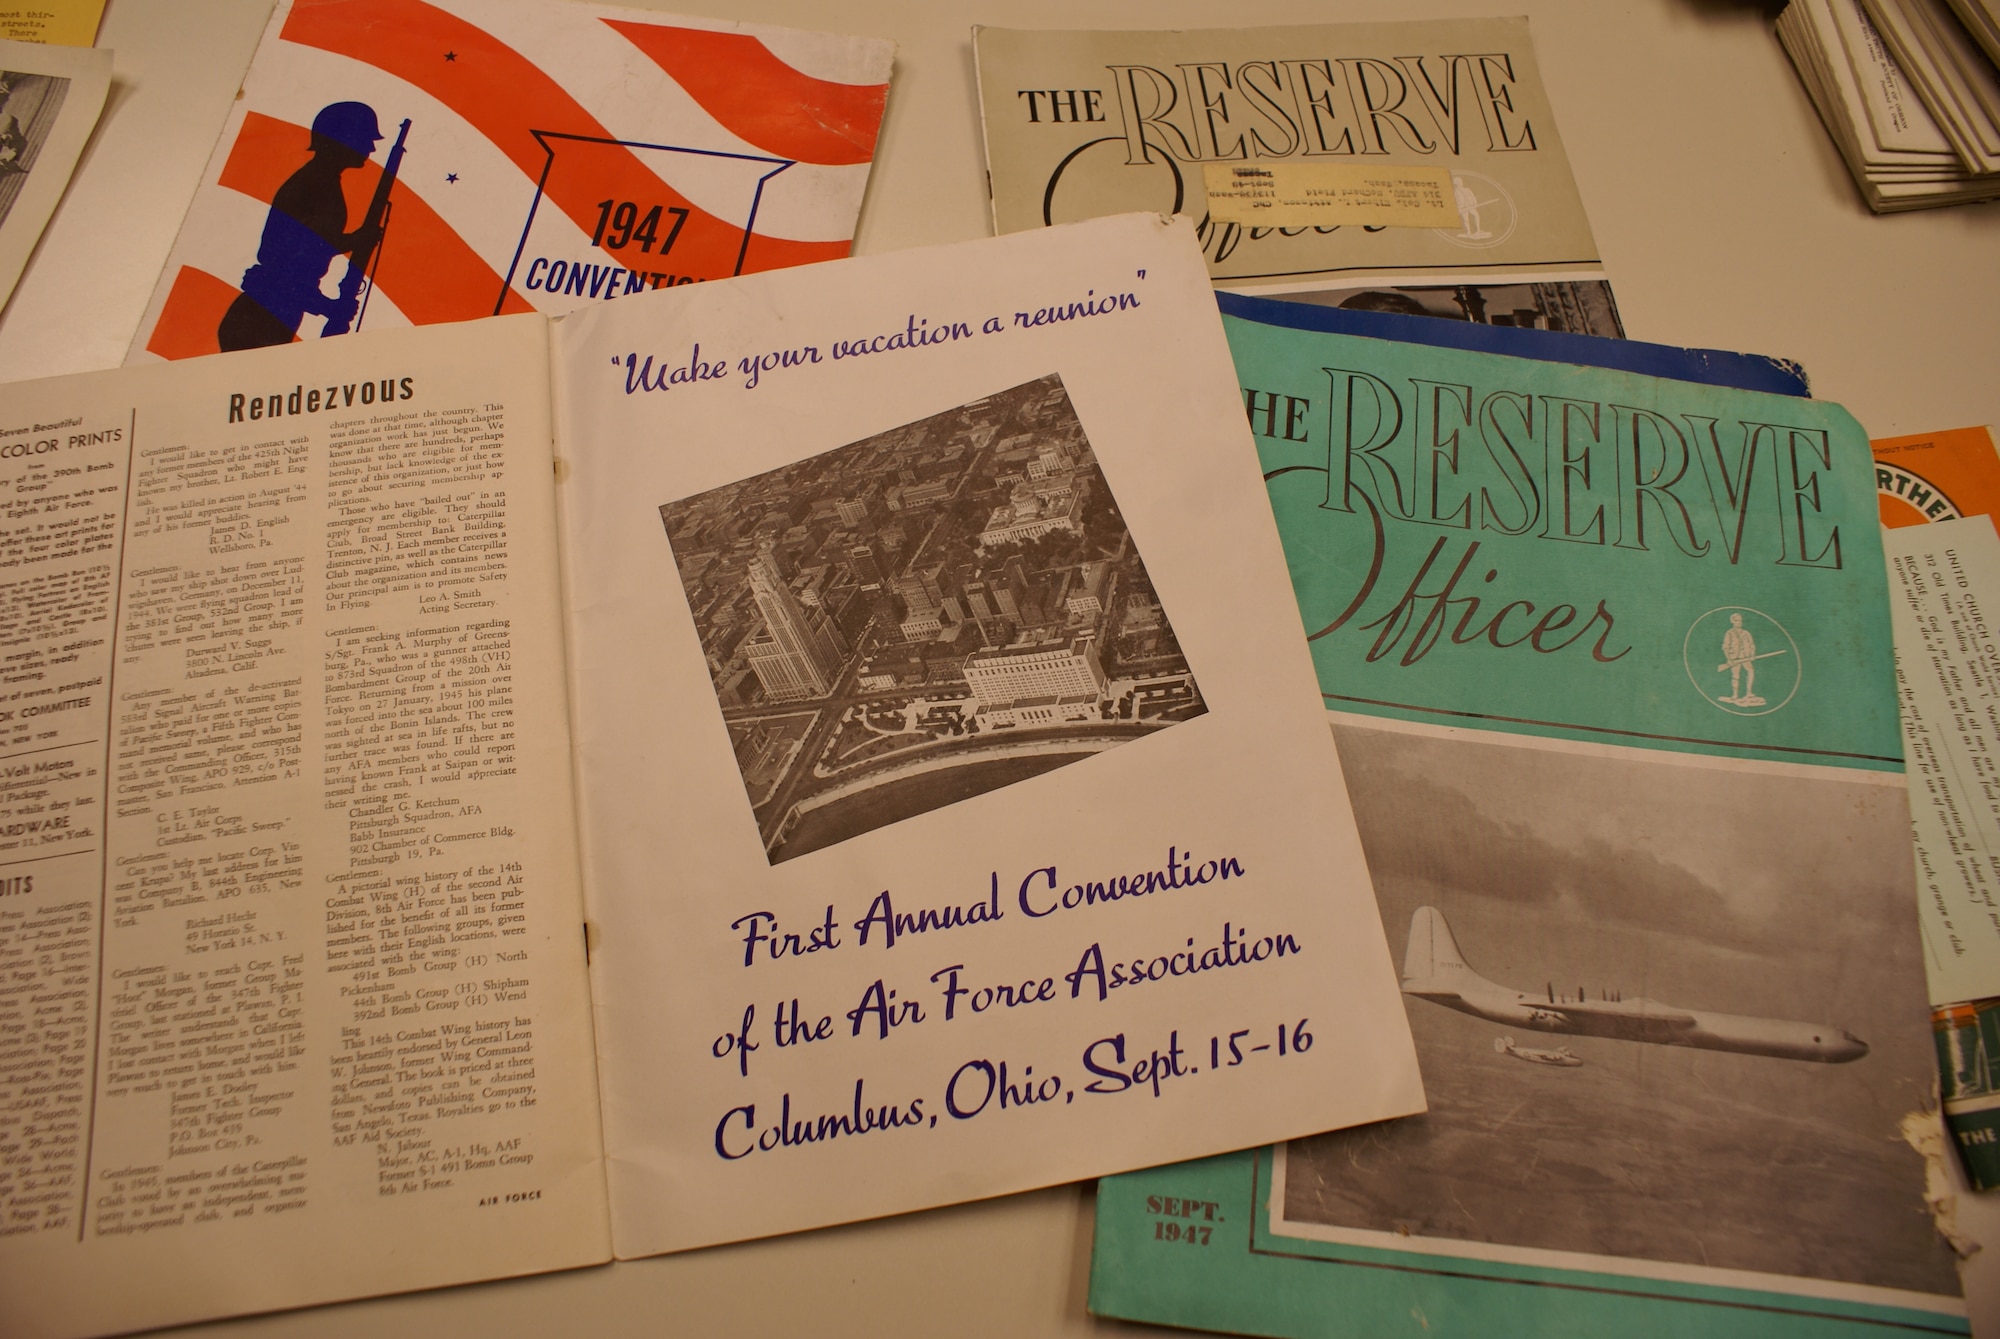 Documents recently discovered under the McChord Chapel include editions of the Reserve Officer magazine, and Air Force – “the official journal of the Air Force Association”. (U.S. Air Force photo/Staff Sgt. Eric Burks)